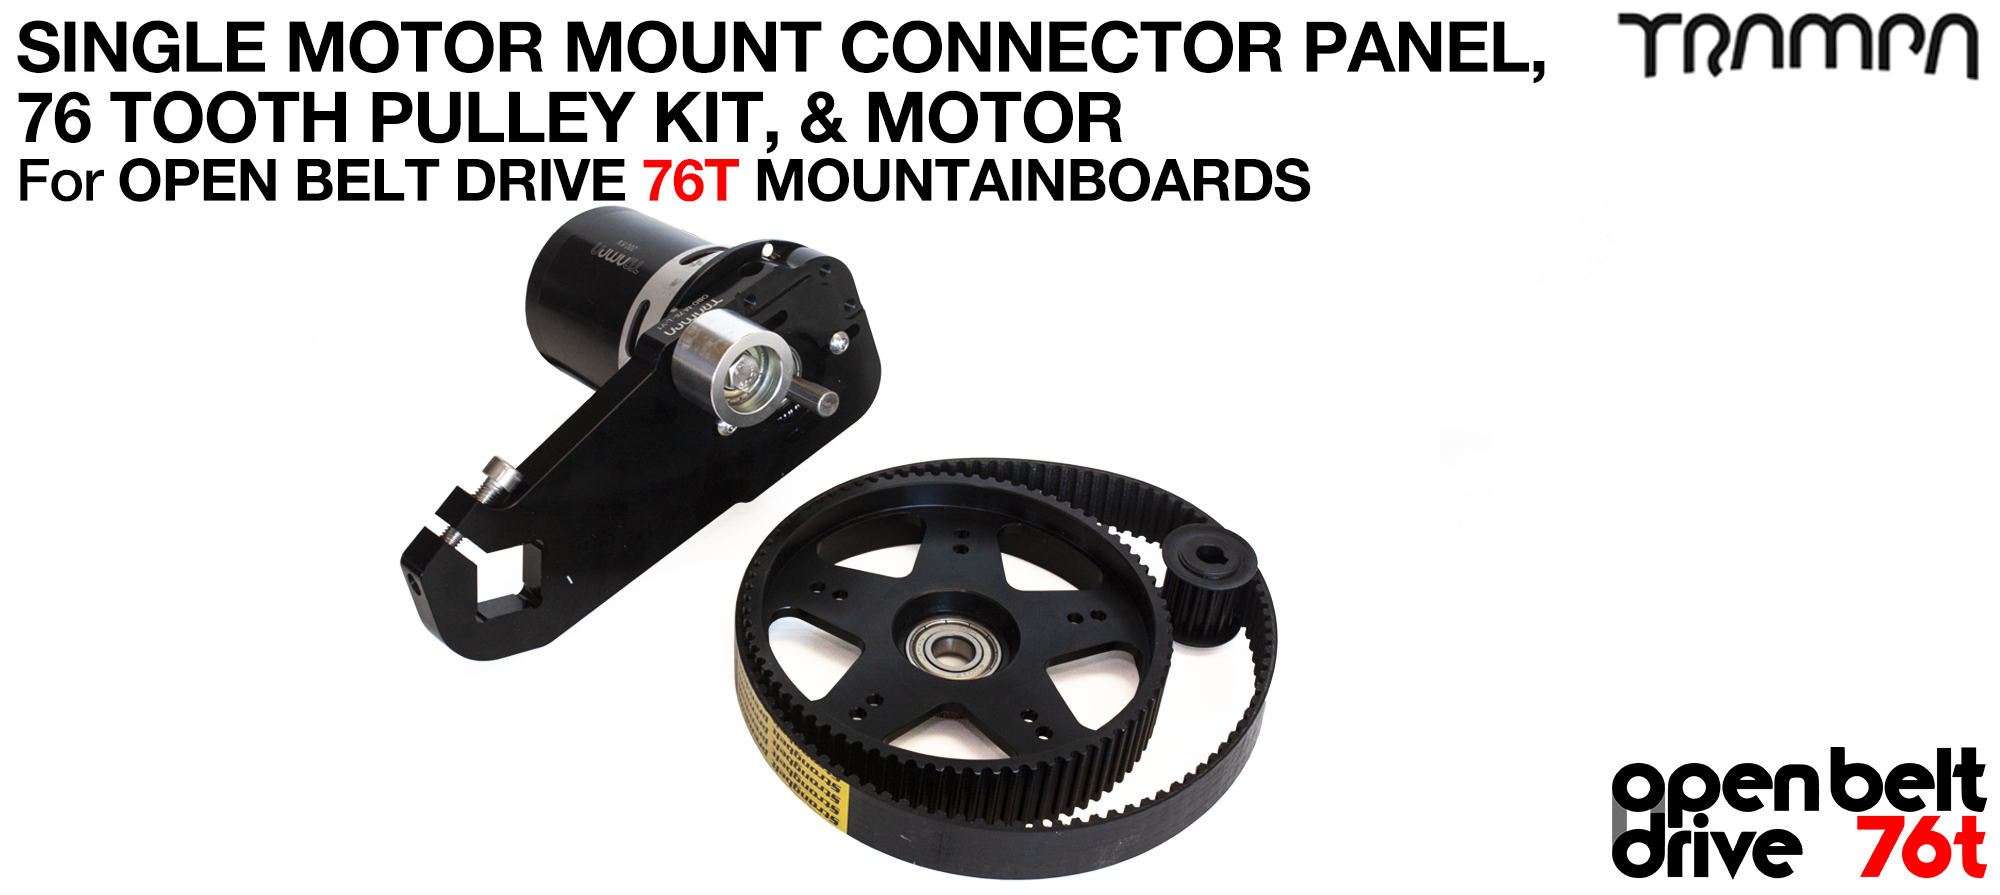 76T OBD Motor Mount & 76 tooth Pulley with MOTOR - SINGLE